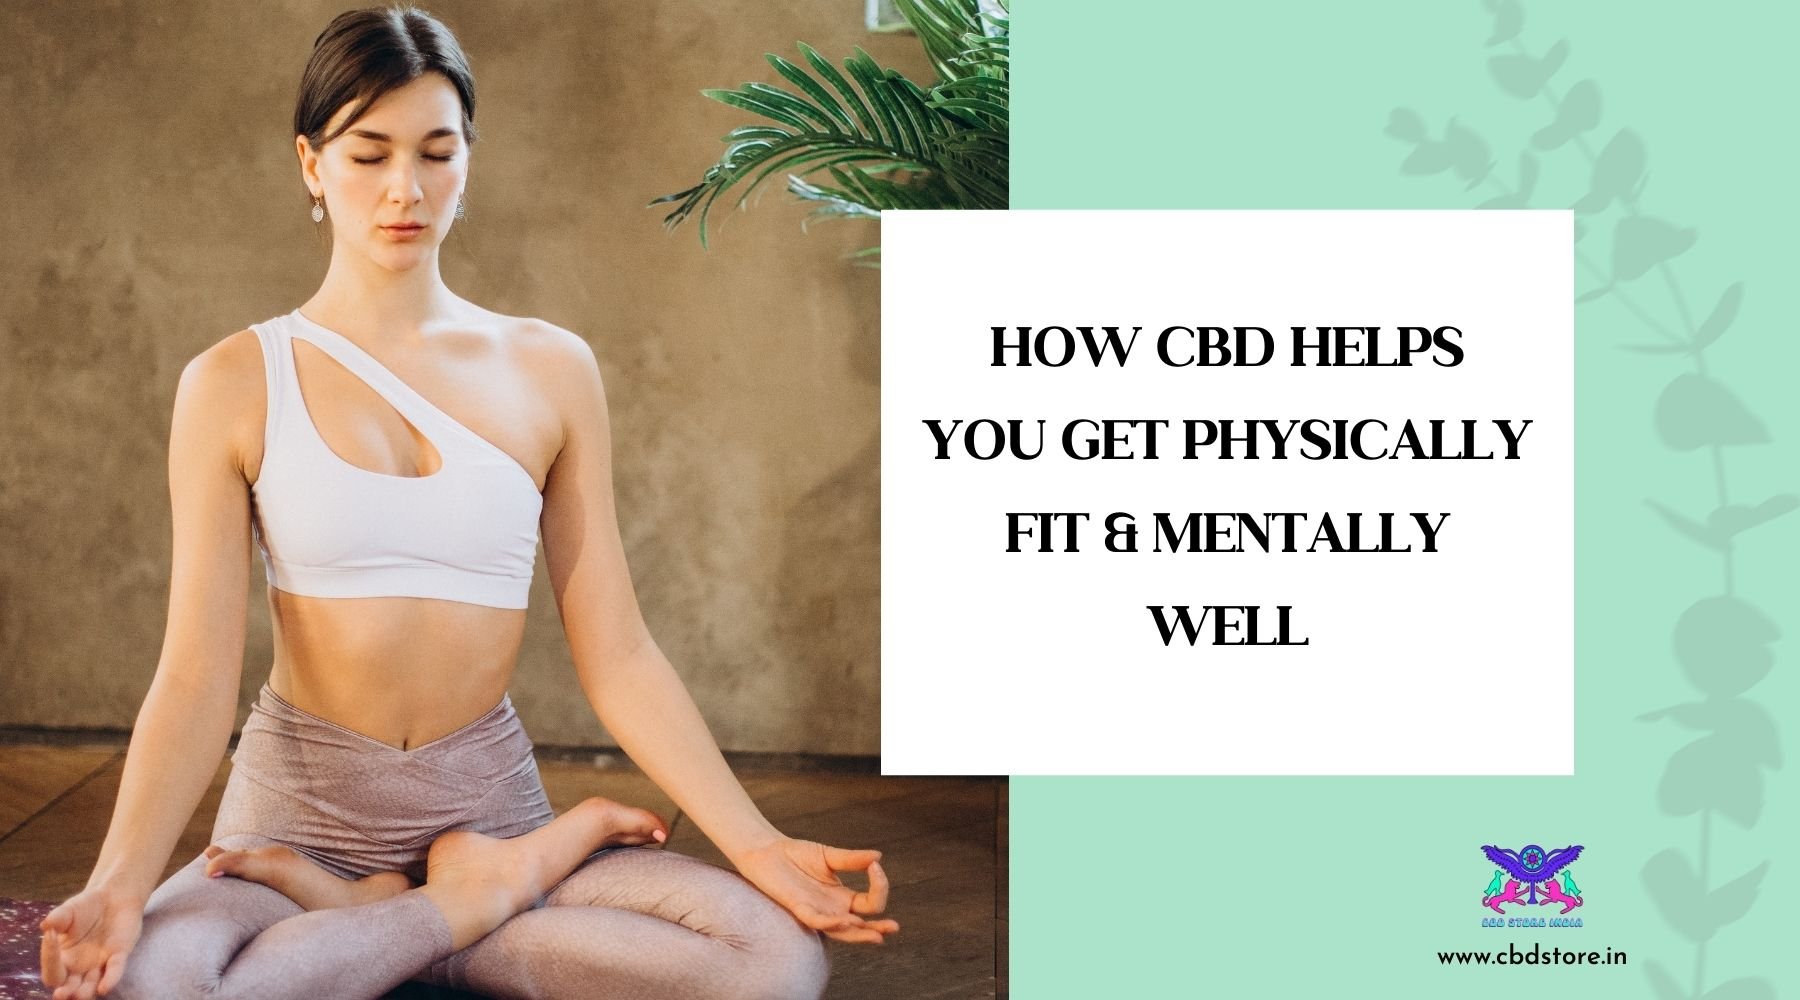 How CBD helps you get physically fit & mentally well - CBD Store India